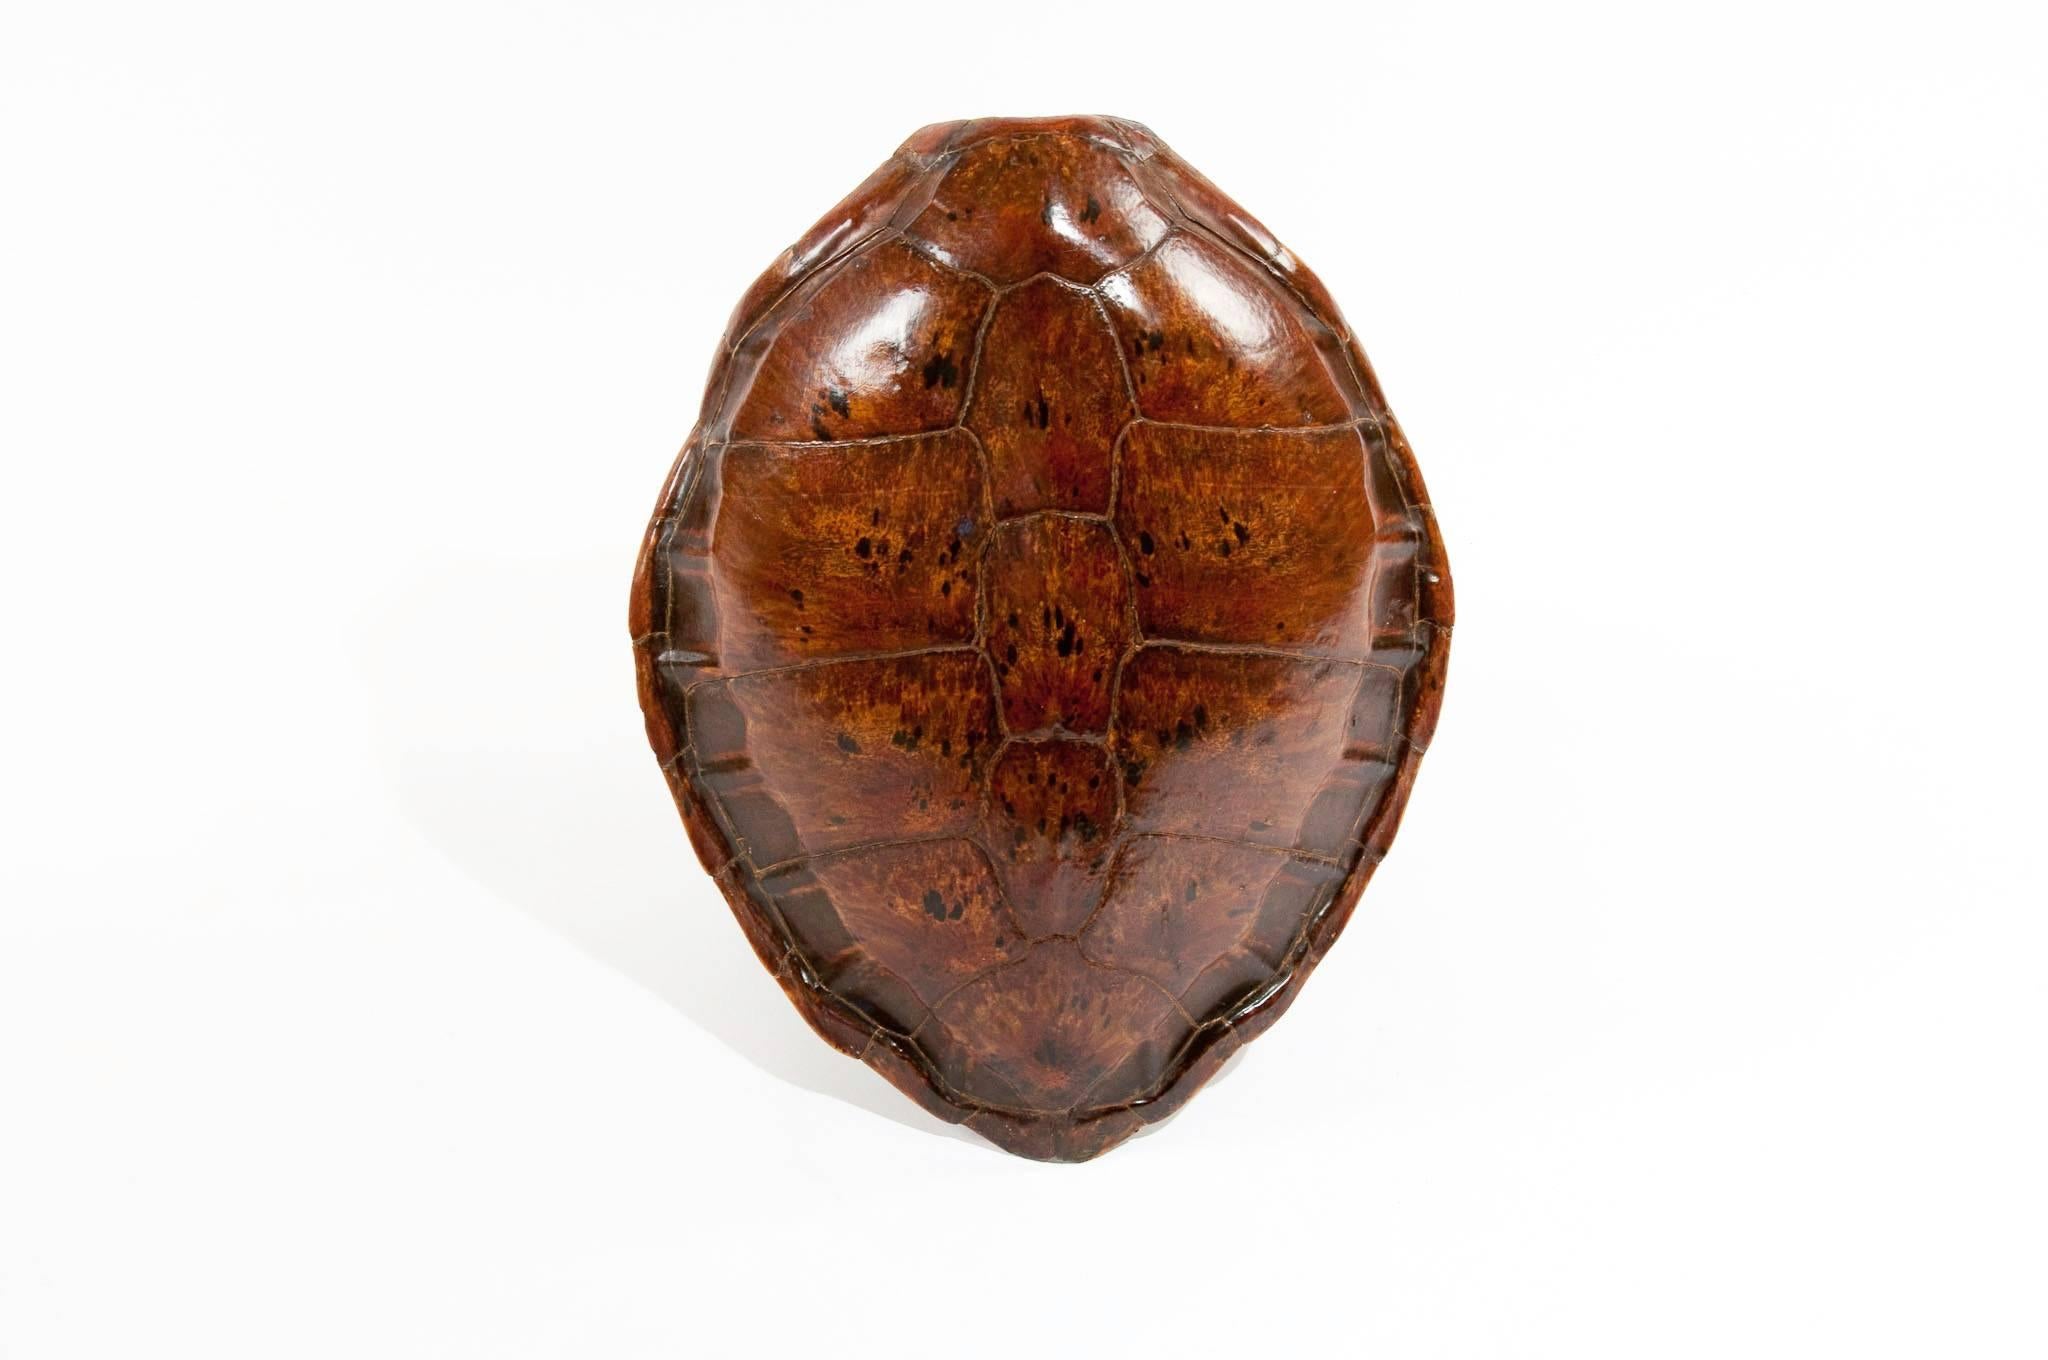 A fine quality large Victorian brown turtle shell of good colour in excellent condition. Having a well formed shell with defined scutes (segments) of very good colour being in excellent condition with a lovely glowing shine. 

Dimensions:
Width: